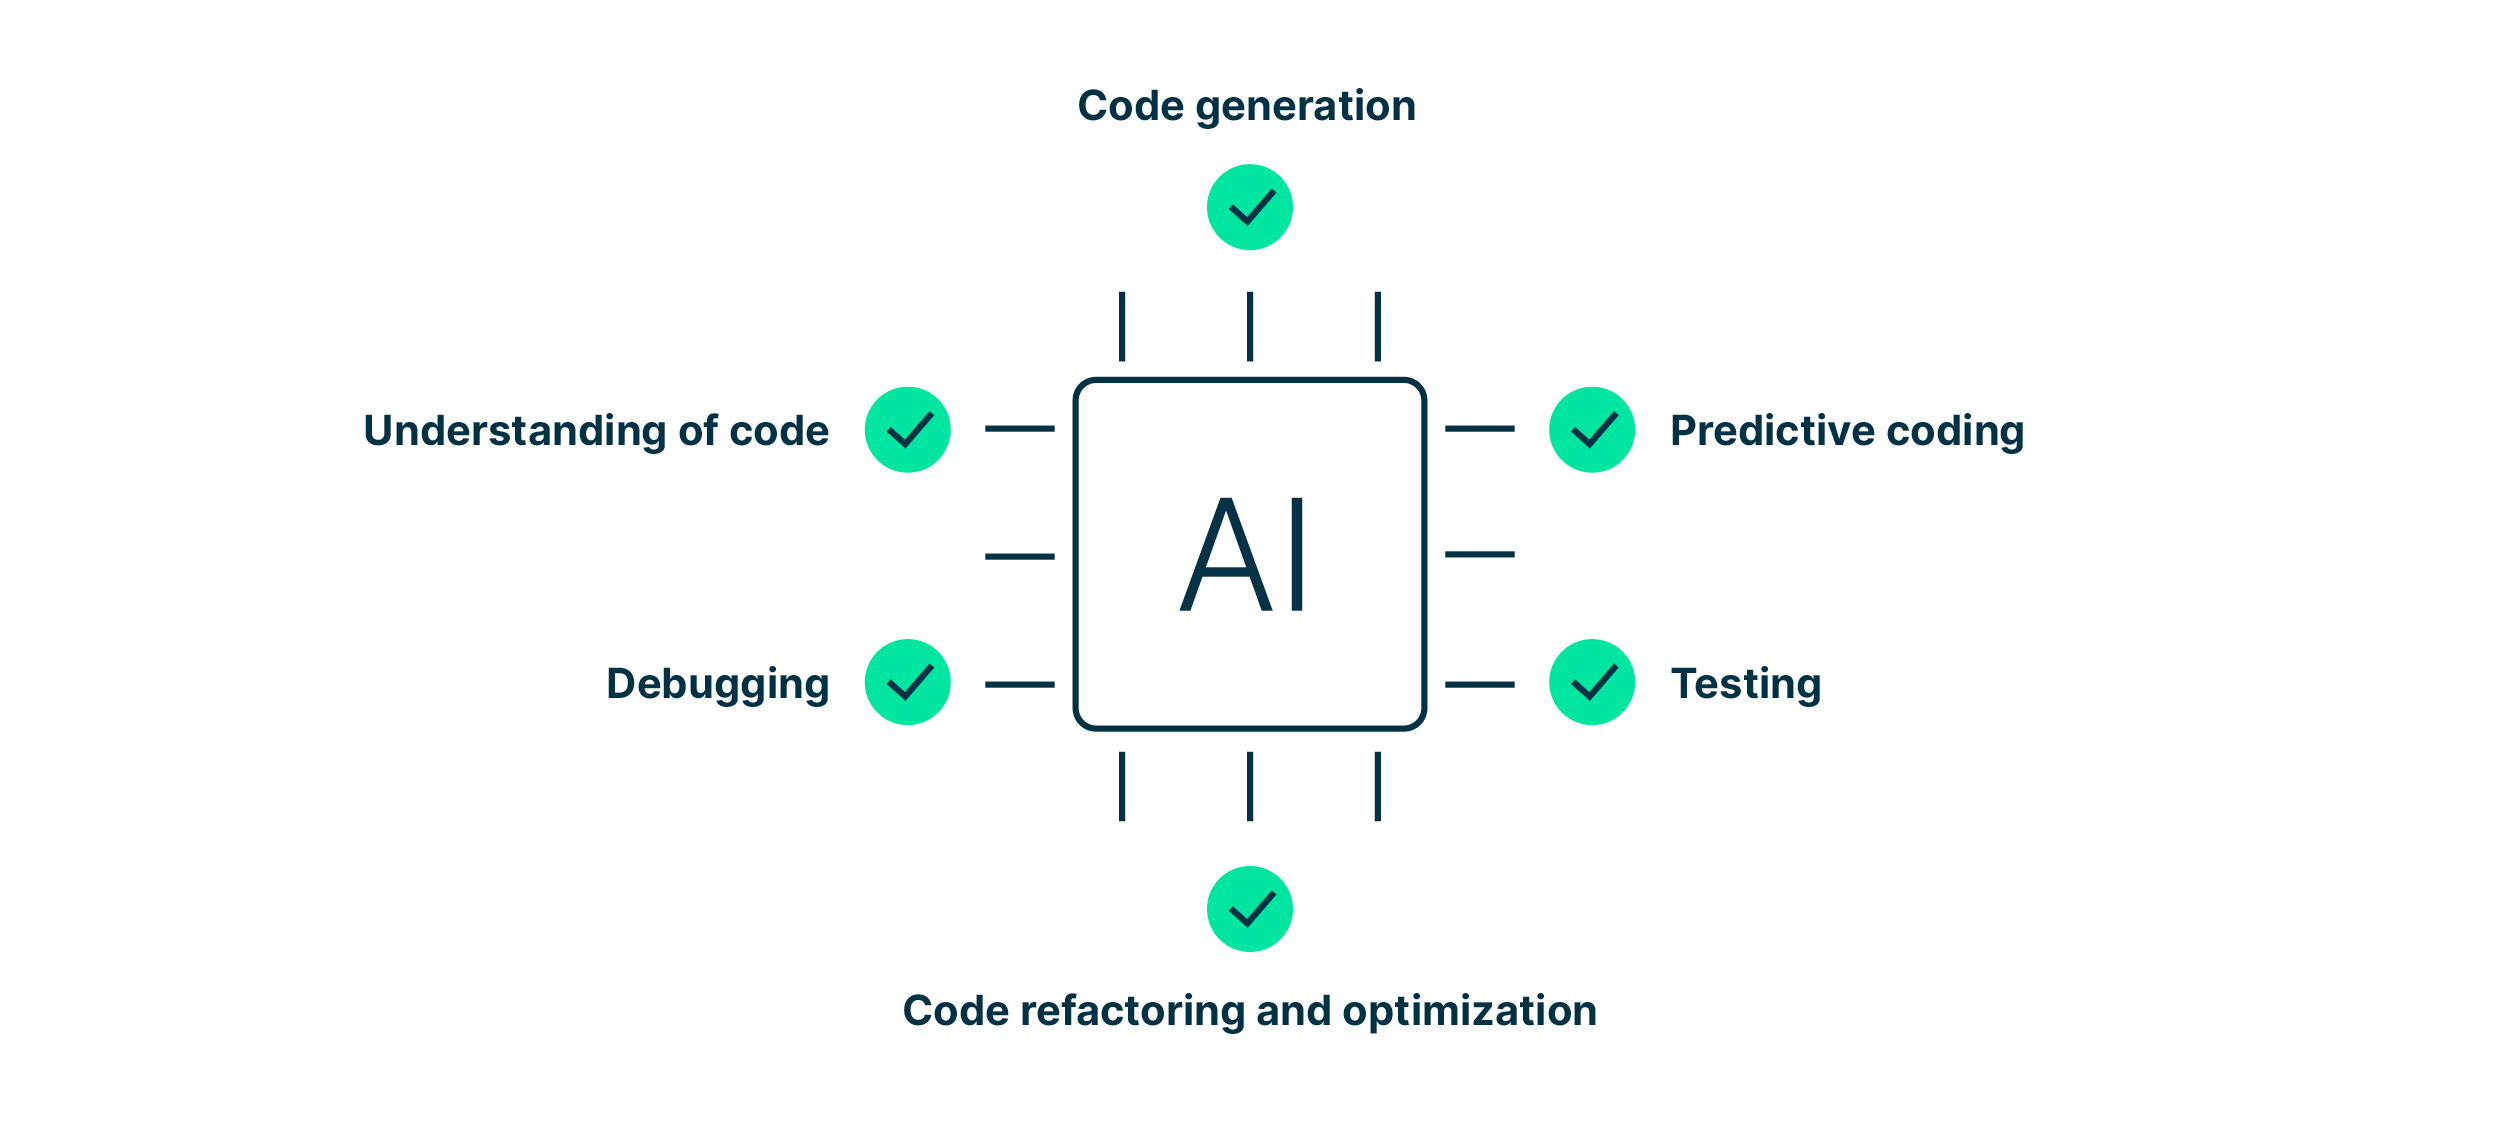 tasks_that_can_be_automated_with_AI_eg_code_generation_and_optimization_predictive_coding_testing_debugging